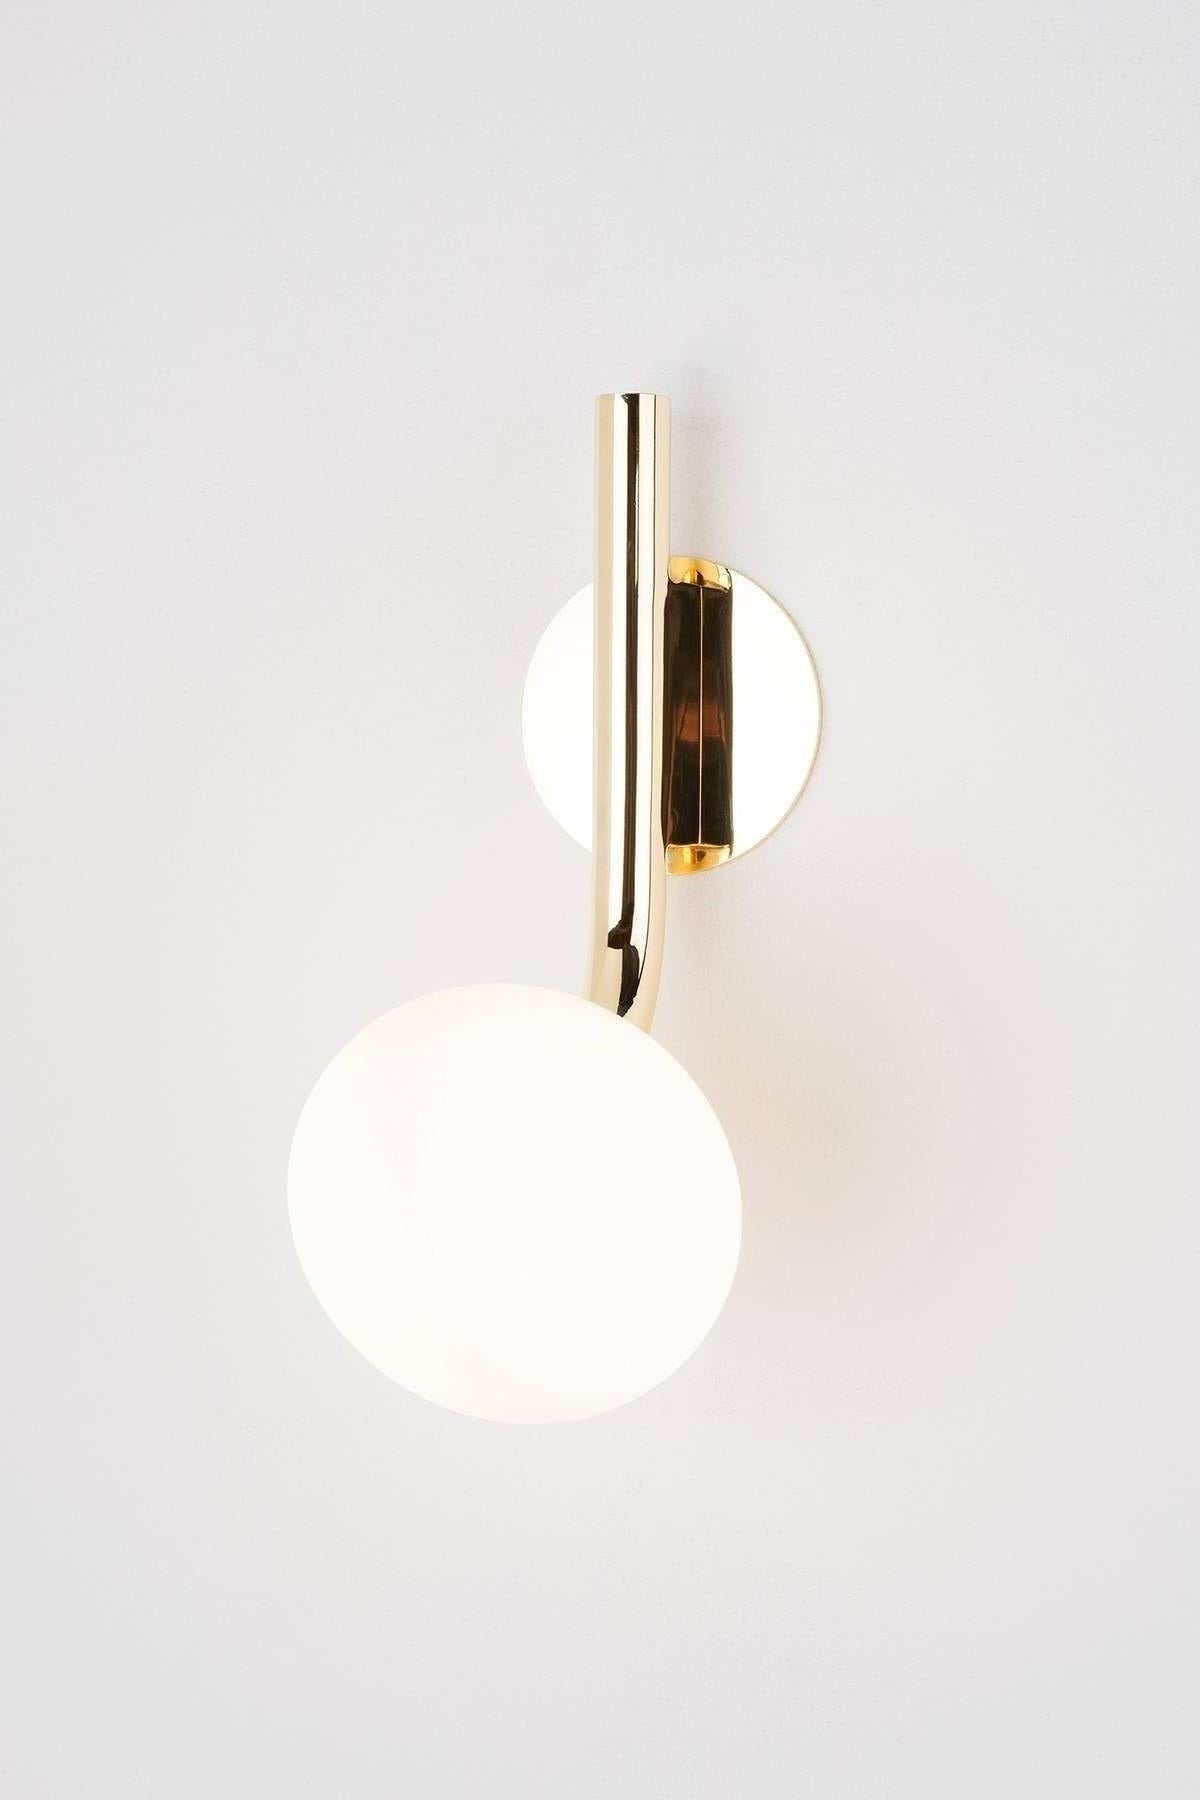 The graceful Etoile sconce is composed of a single curved limb providing a soft glow from the sand blasted, handblown glass shade. The backplate and stem are finished in both polished or satin brass, nickel and copper. The drop, and stems are